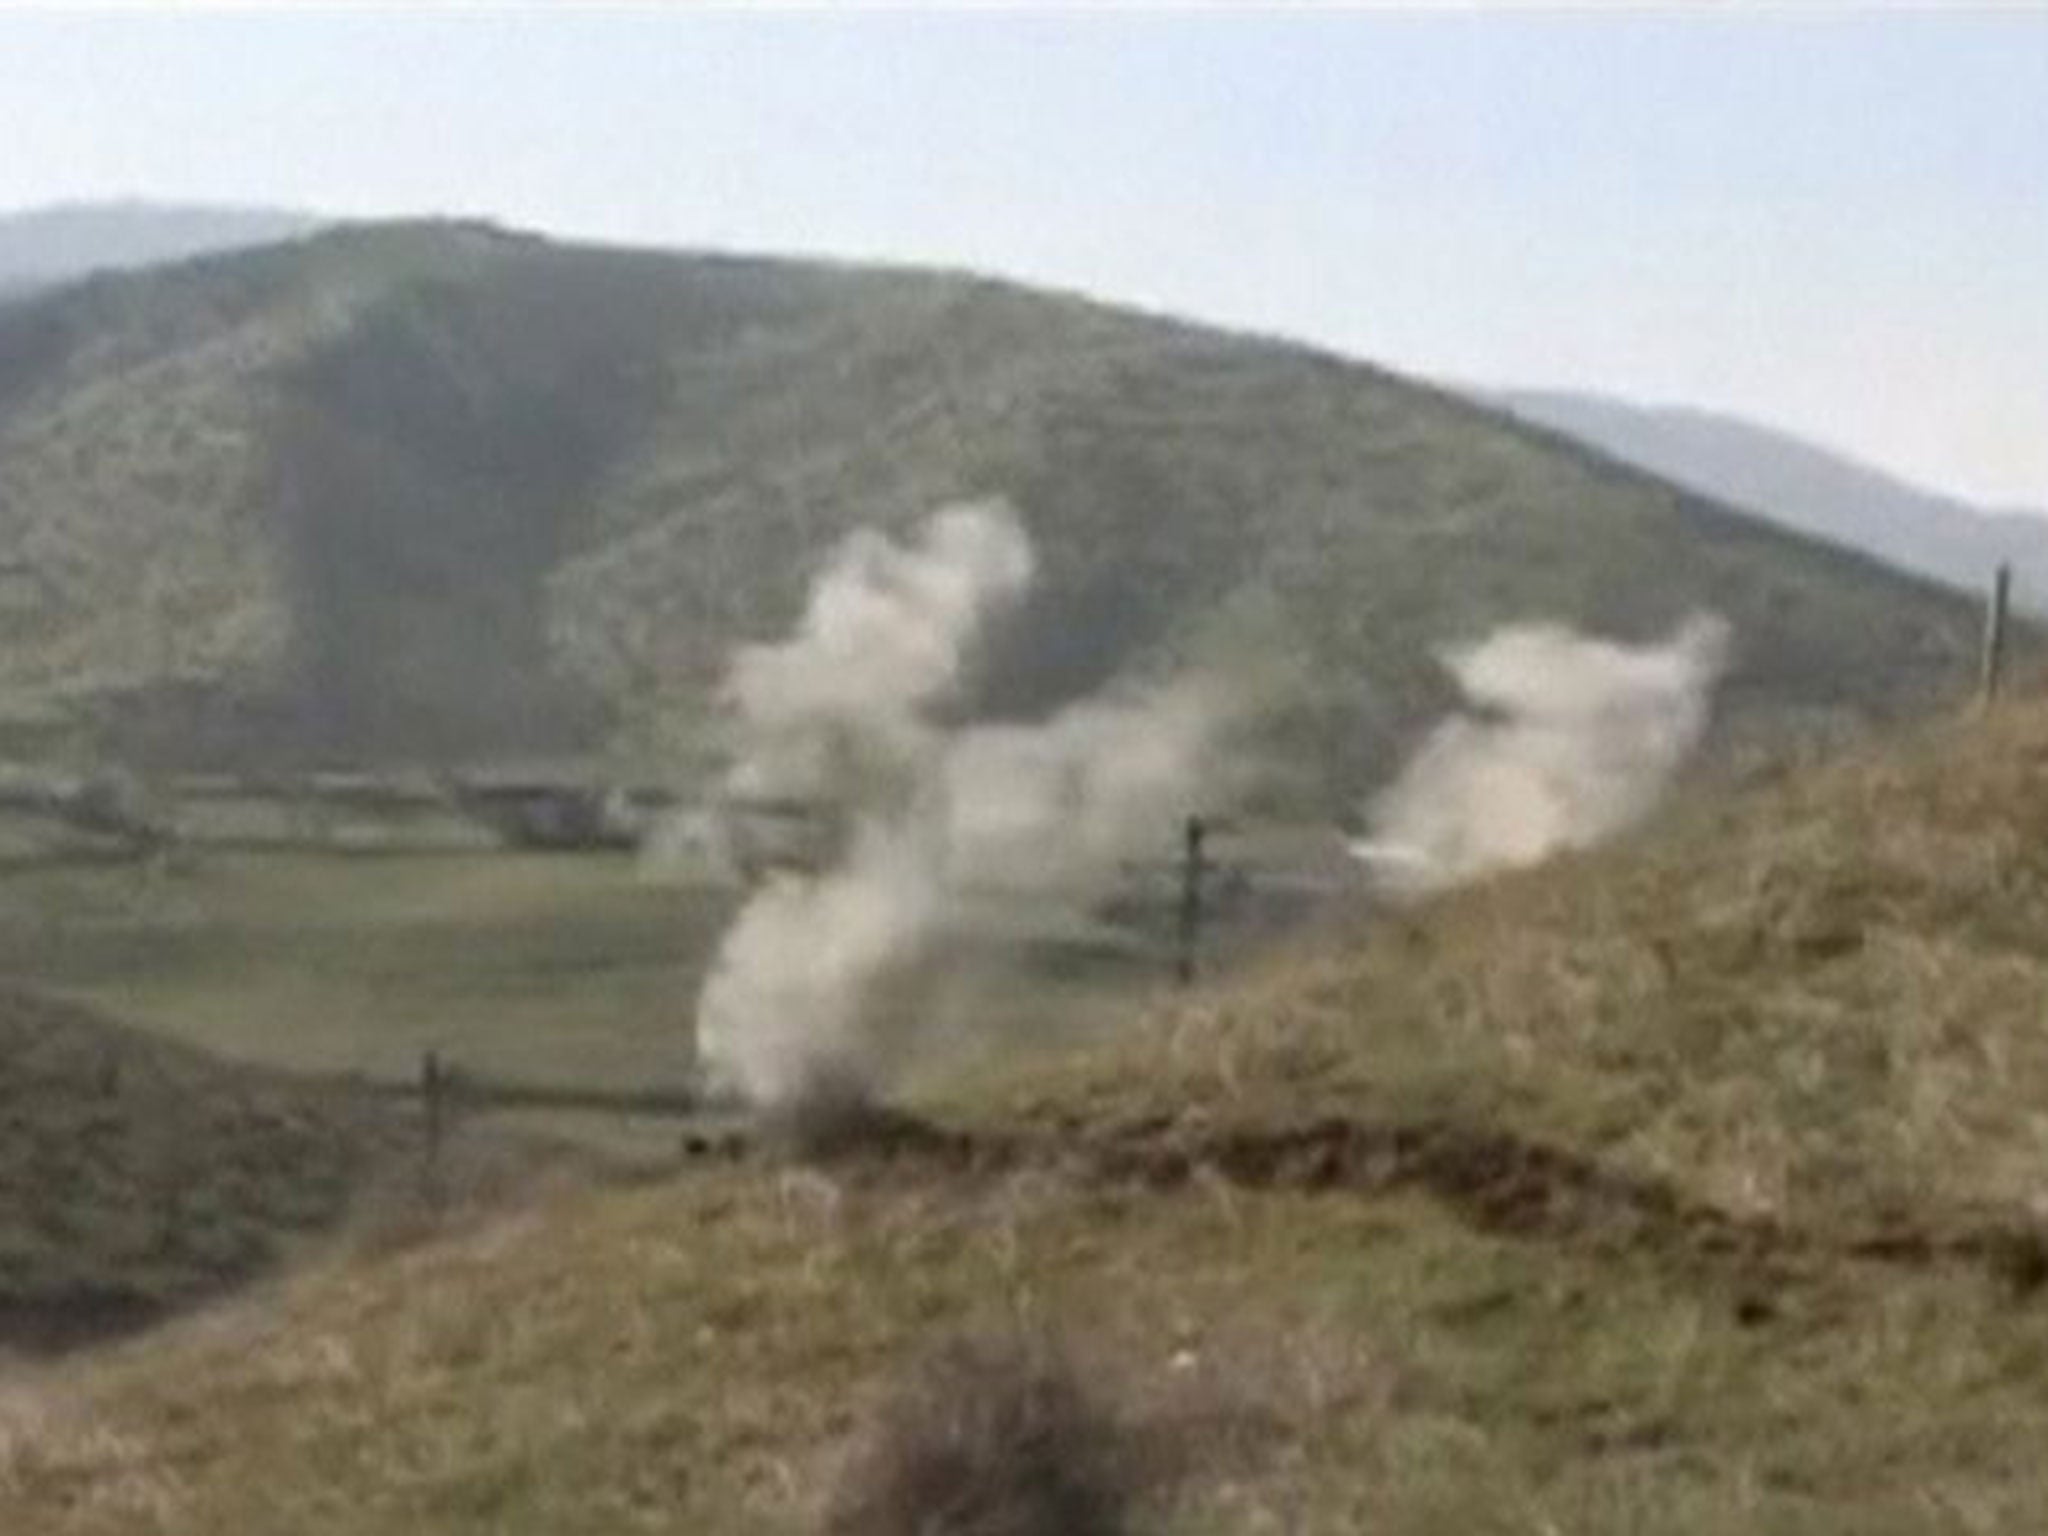 Smoke rises after clashes between Armenian and Azeri forces in Nagorno-Karabakh region, which is controlled by separatist Armenians, in this still image taken from video provided by the Nagorno-Karabakh region Defence Ministry, 2 April, 2016.